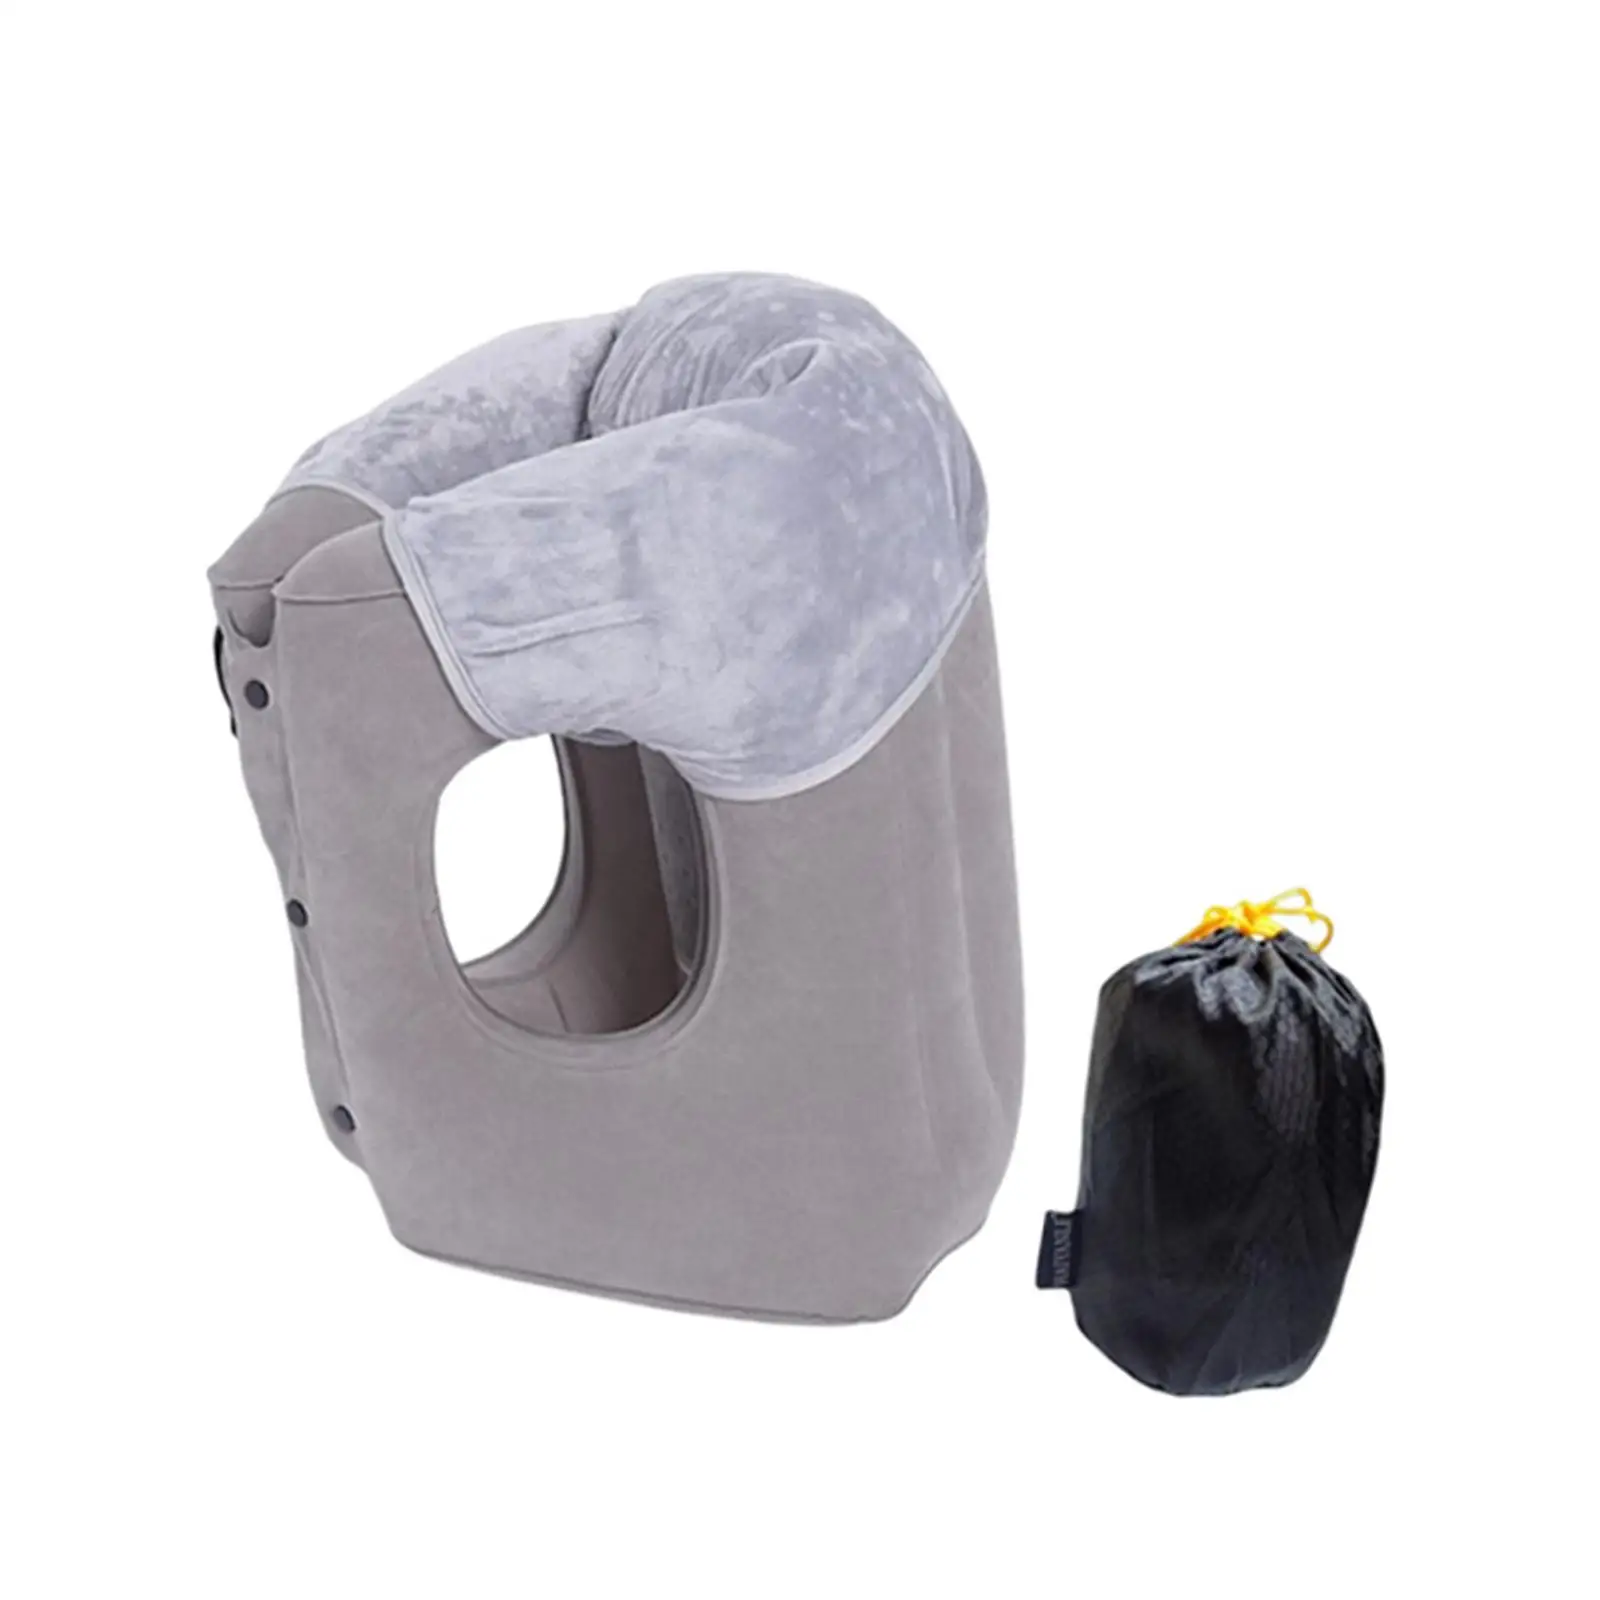 Folding Inflatable Travel Pillow with Drawstring Bag Headrest Inflatable Air Pillow for Plane Office Travel